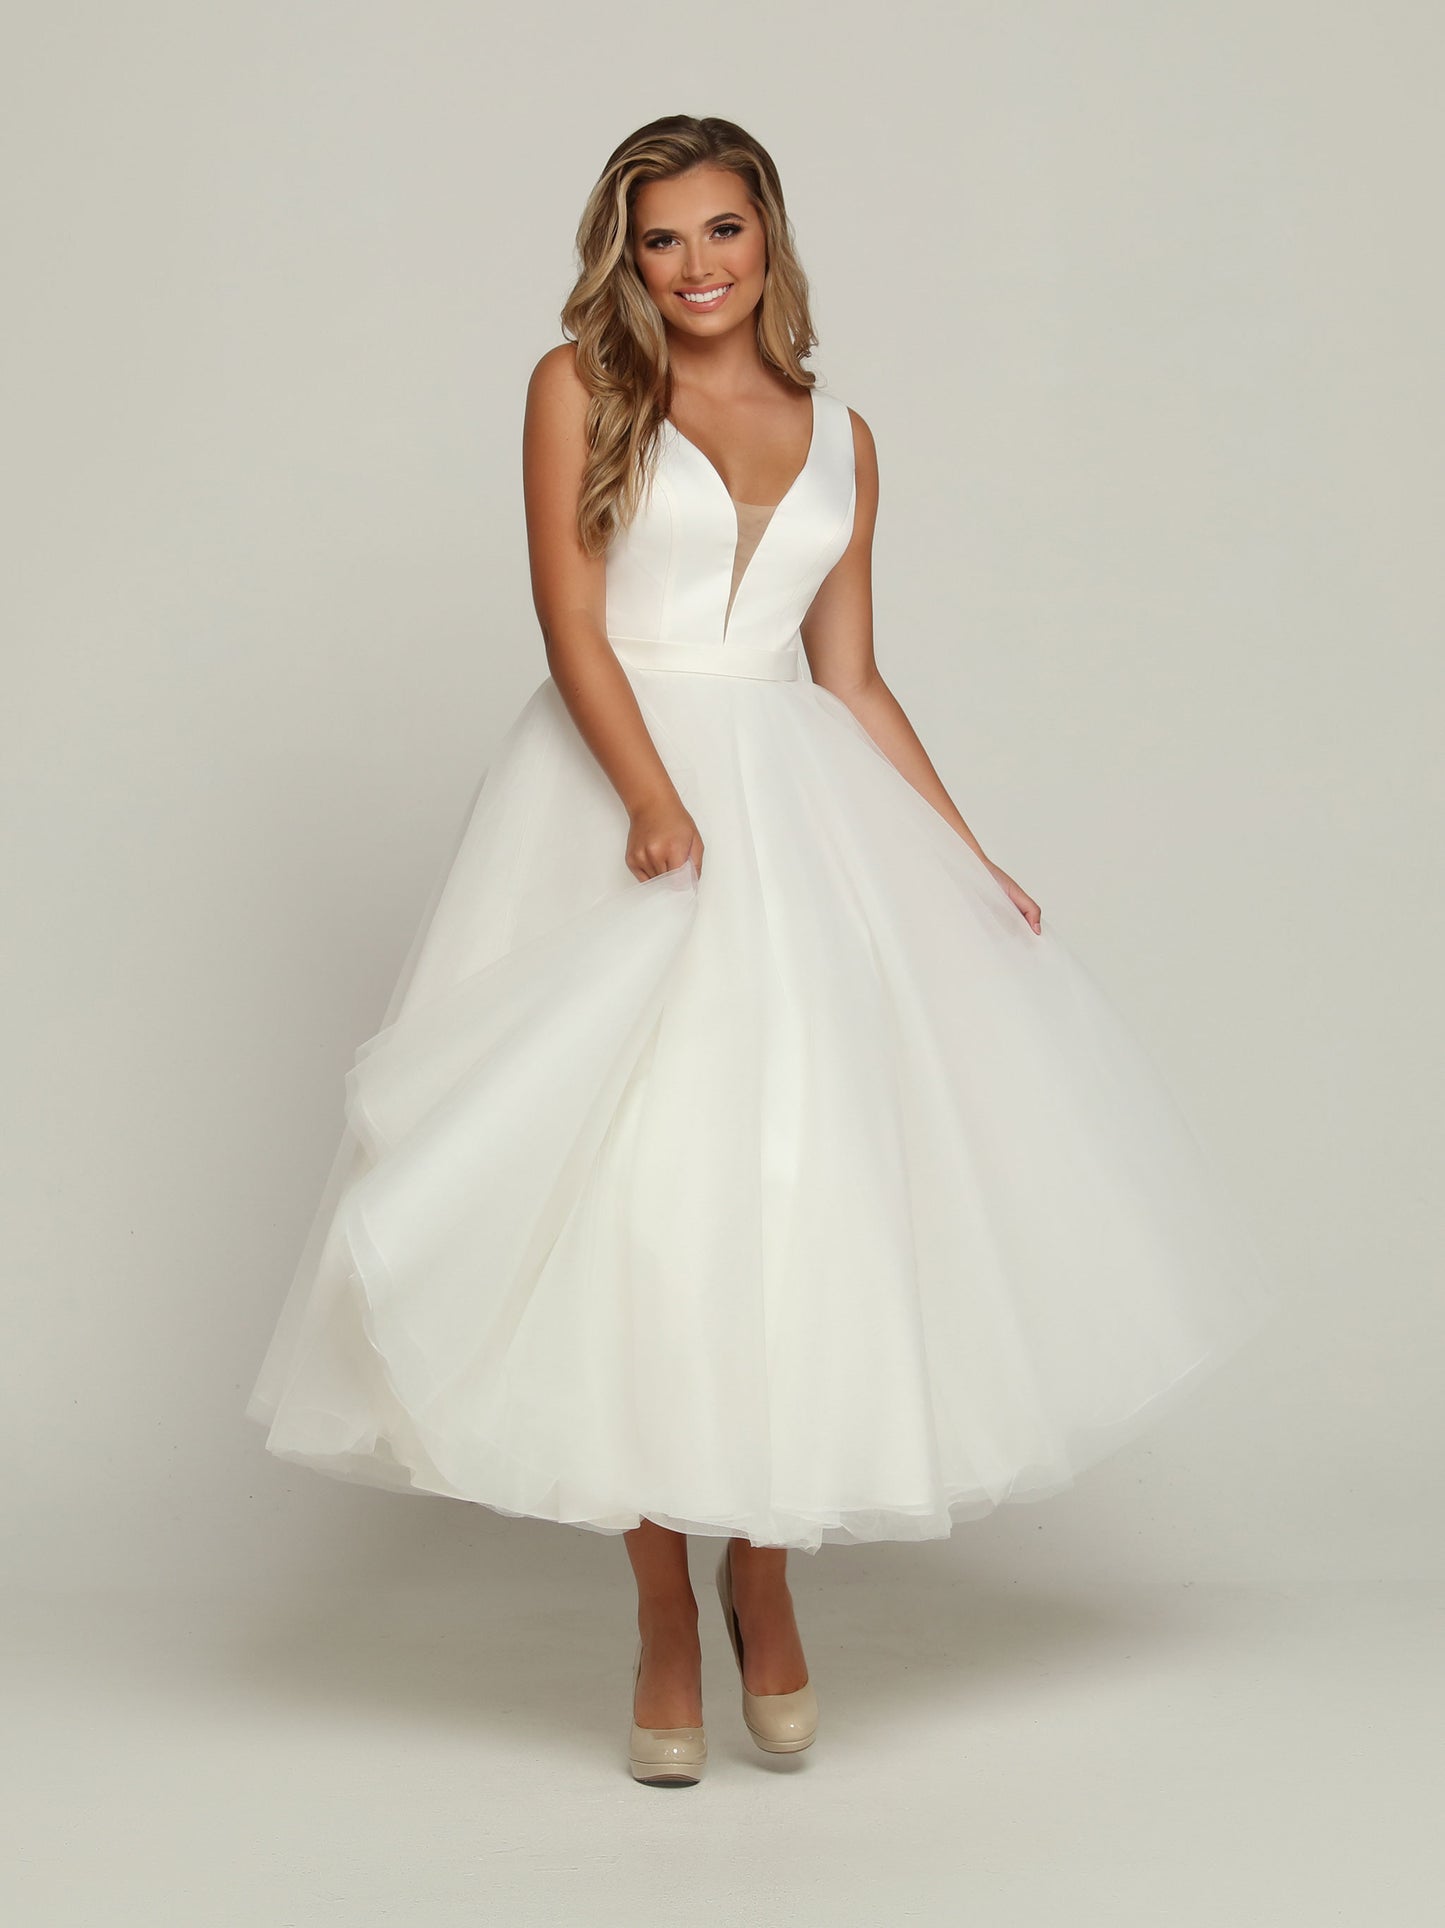 Davinci Bridal 50685 Tea length Ballgown removable skirt wedding dress Bridal Gown Tulle Two Looks in one, this Two-Piece Satin & Tulle A-Line Ball Gown Wedding Dress starts with a Plunging V-Neckline & Sheer Side Panels. The Scoop Back has a Sheer Overlay with a Covered Button Trim. Remove the Top Skirt with its Chapel Train to reveal a Pretty Tea Length Dress.